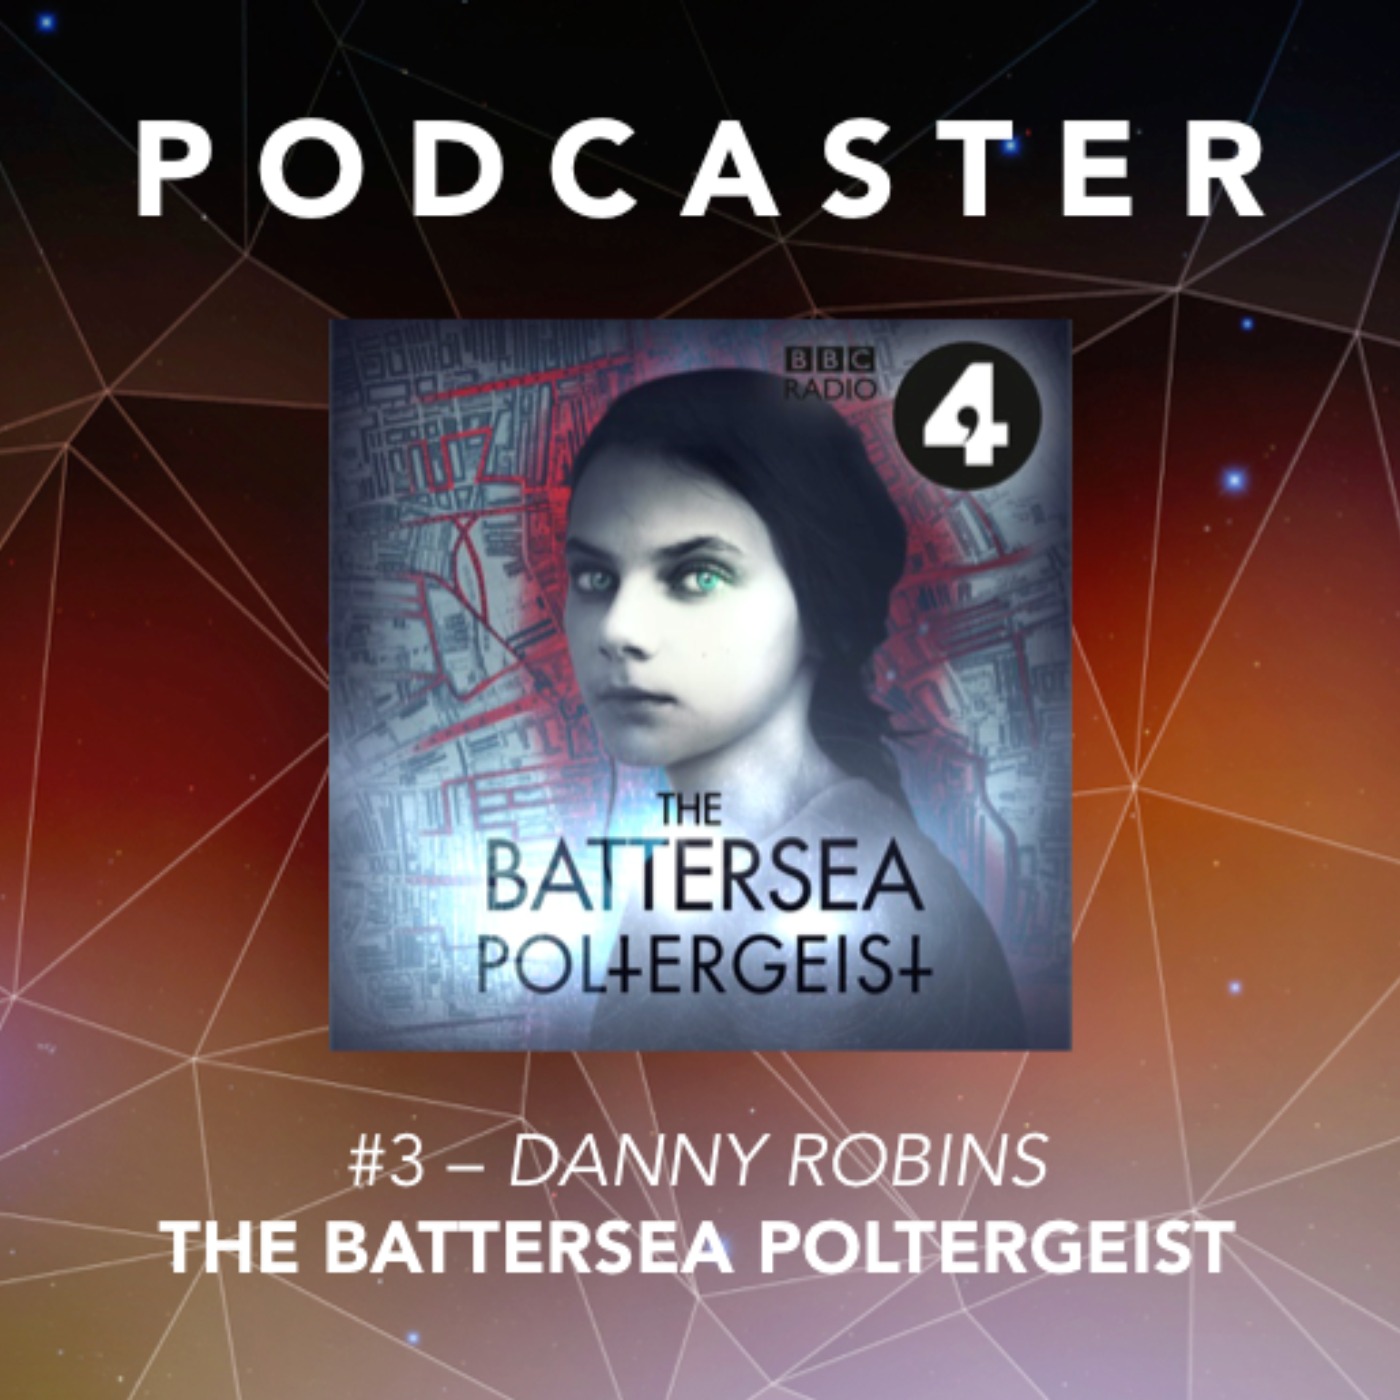 #3 – Danny Robins / The Battersea Poltergeist